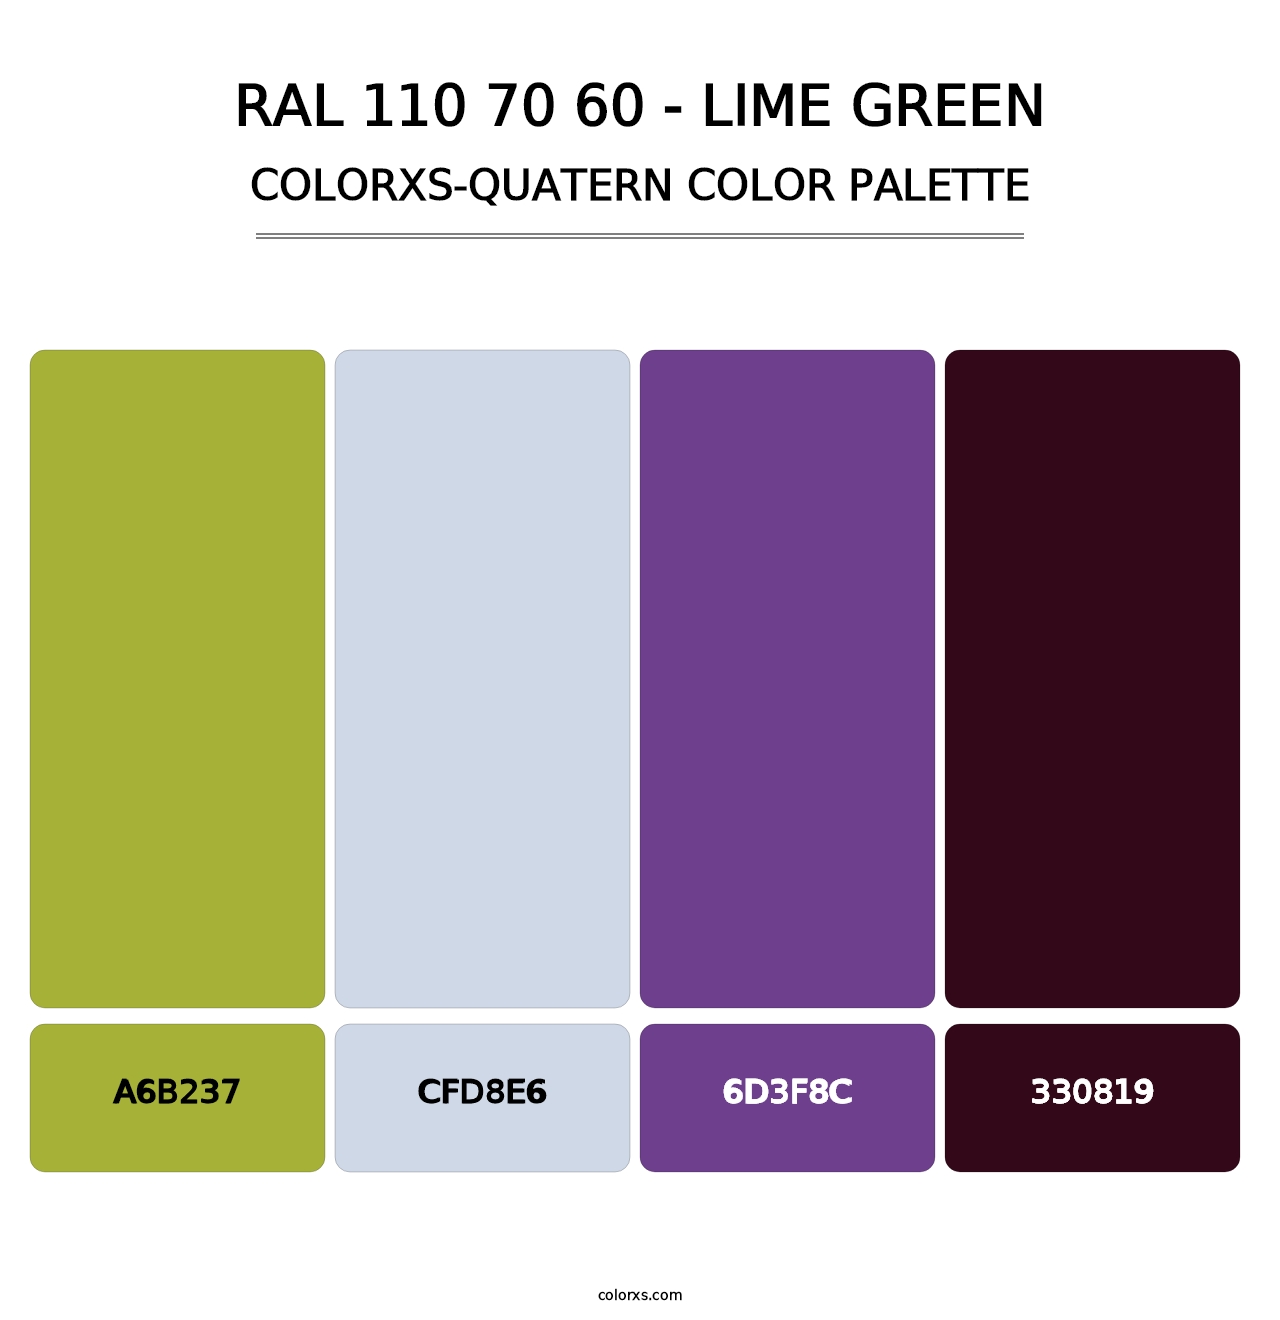 RAL 110 70 60 - Lime Green - Colorxs Quatern Palette